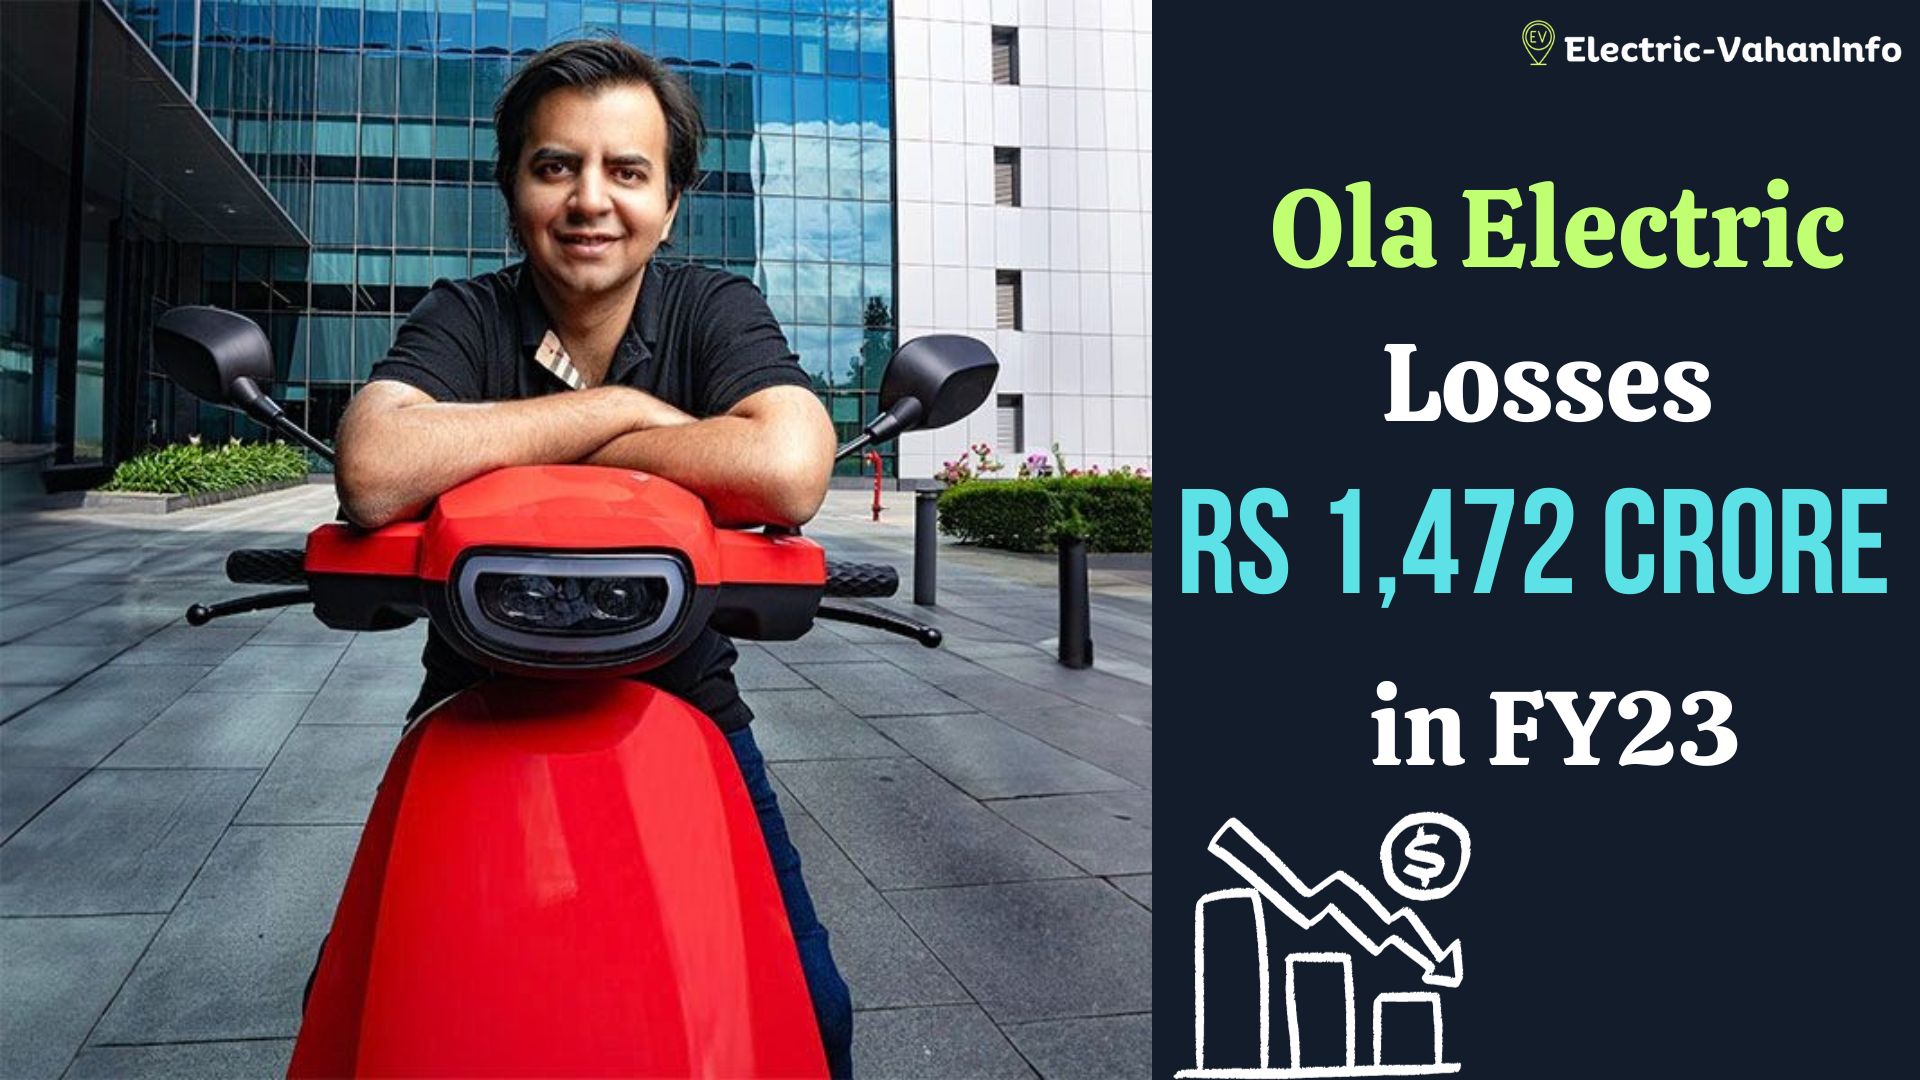 https://electric-vahaninfo.com/ola-electric-losses-of-rs-1472-crore-in-fy23/